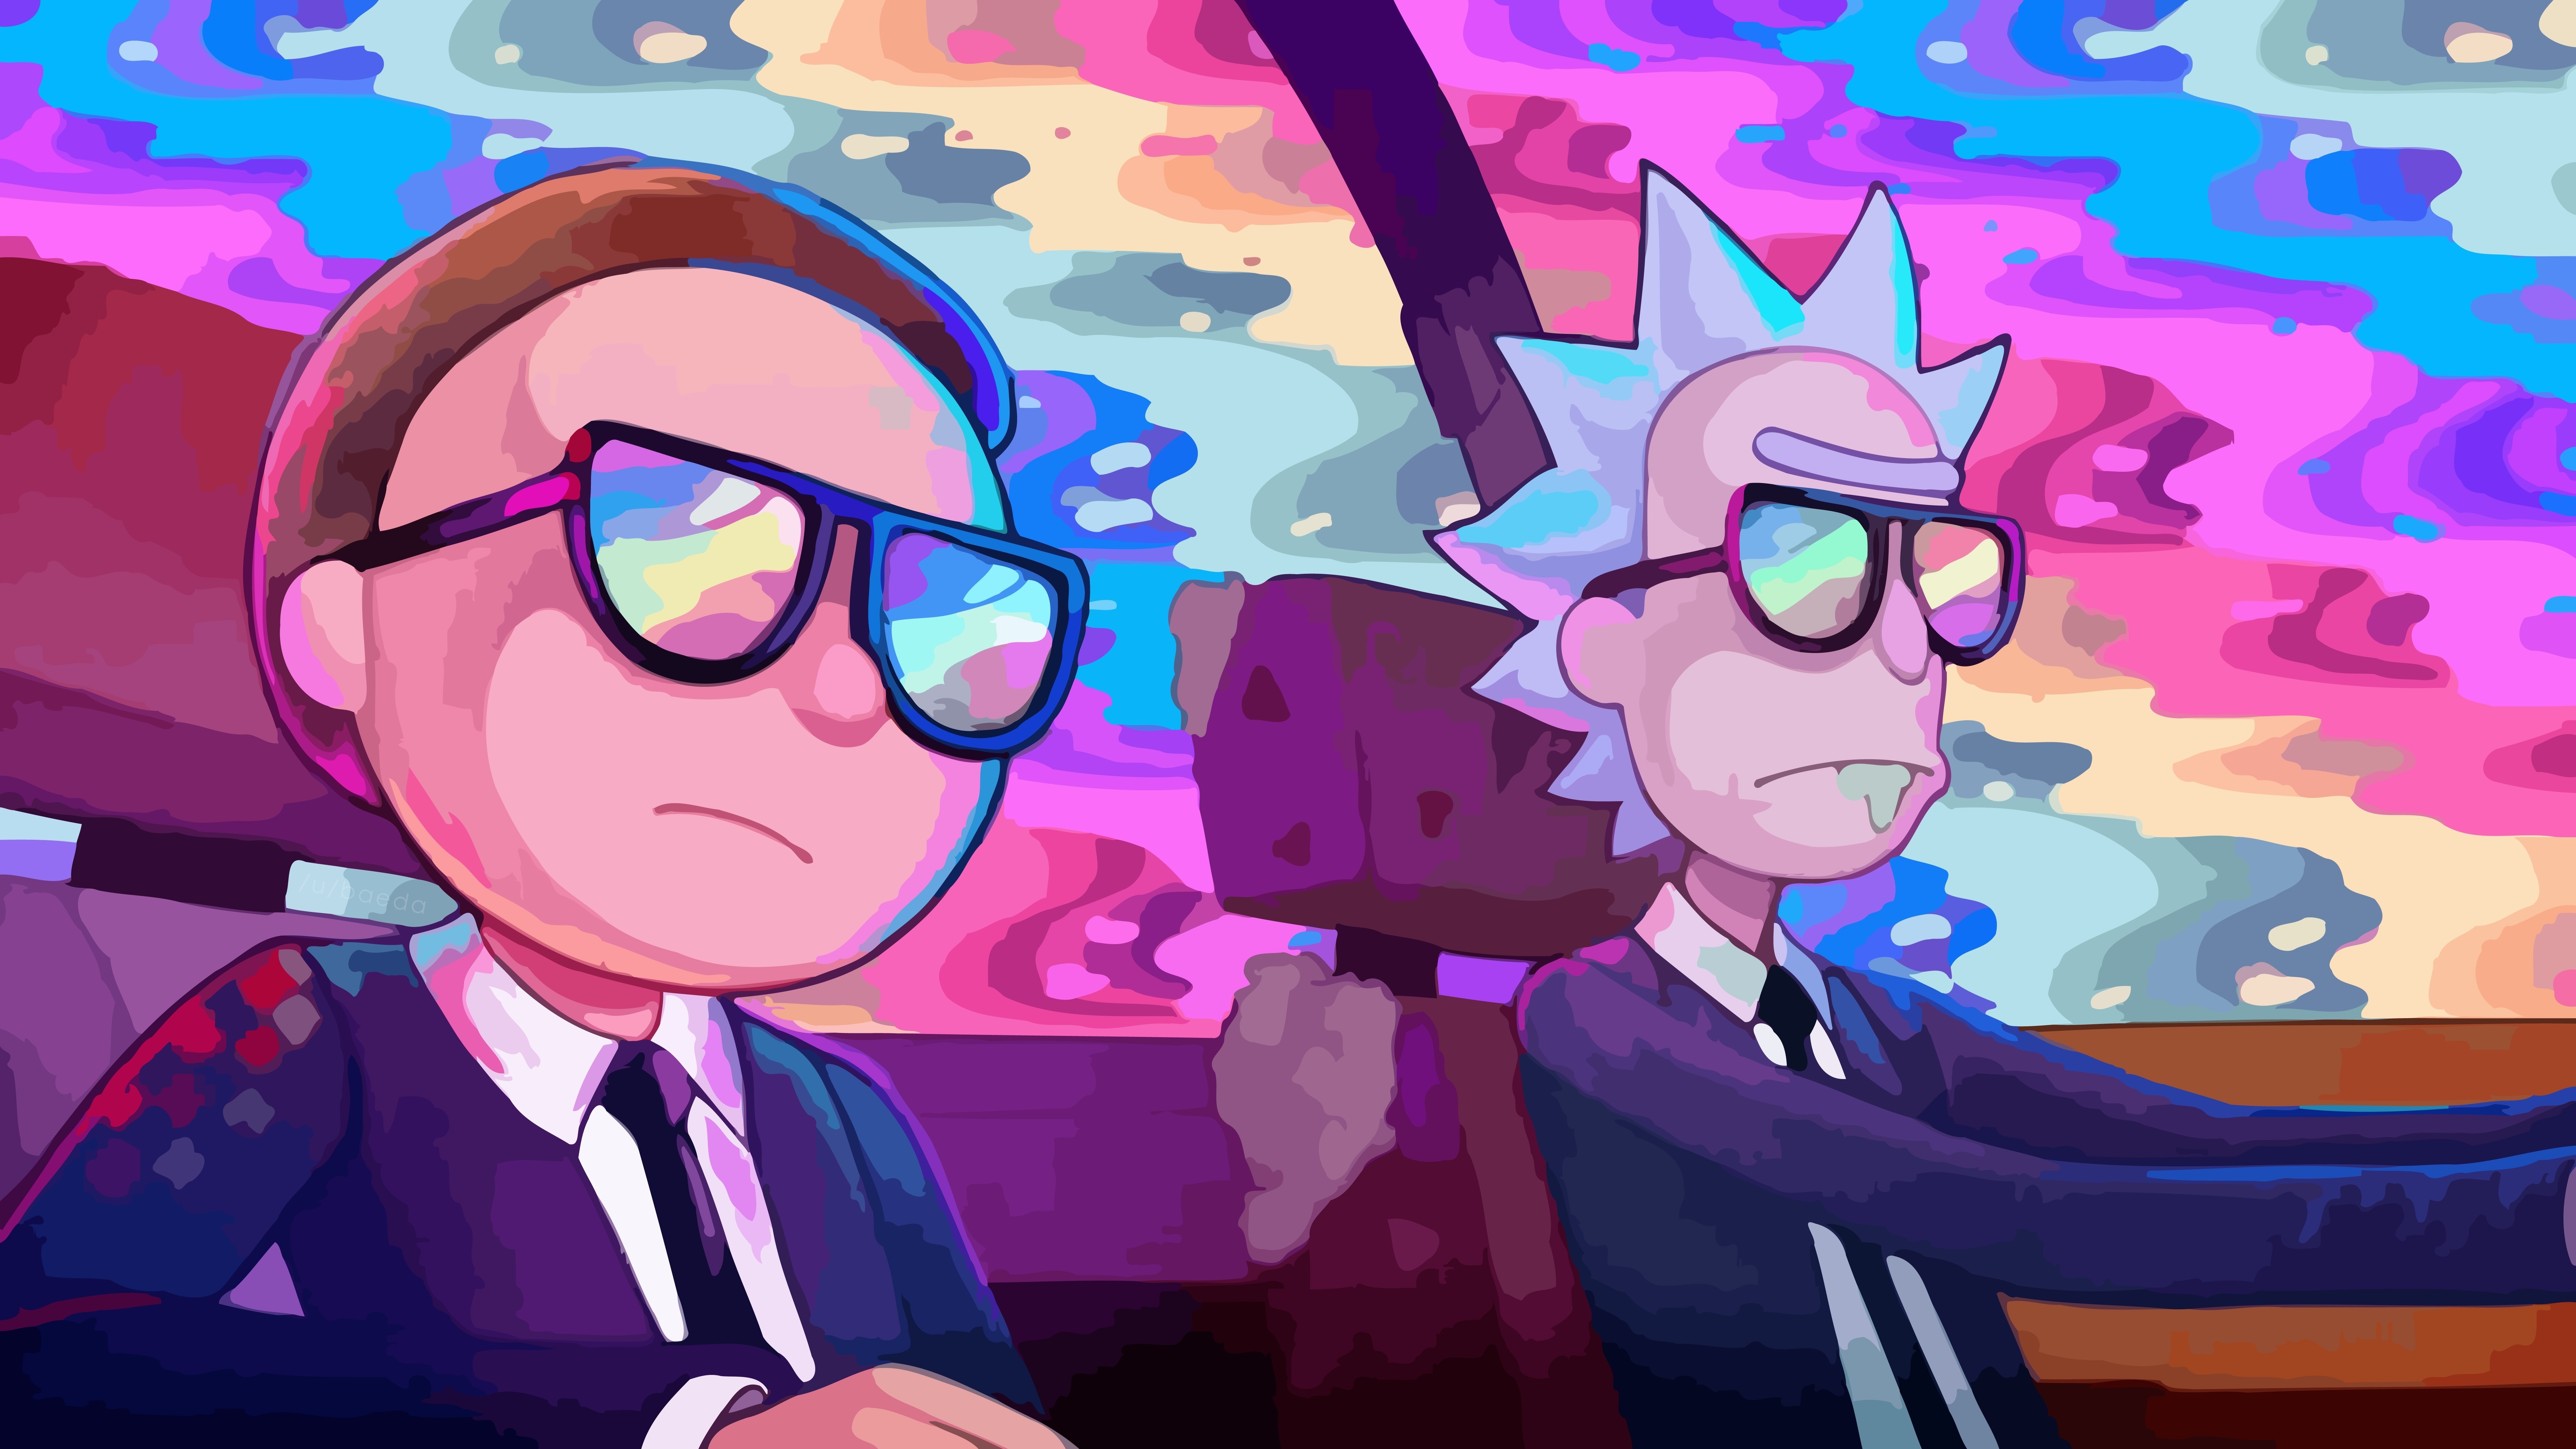 Rick-Morty 4K wallpapers for your desktop or mobile screen free and easy to  download